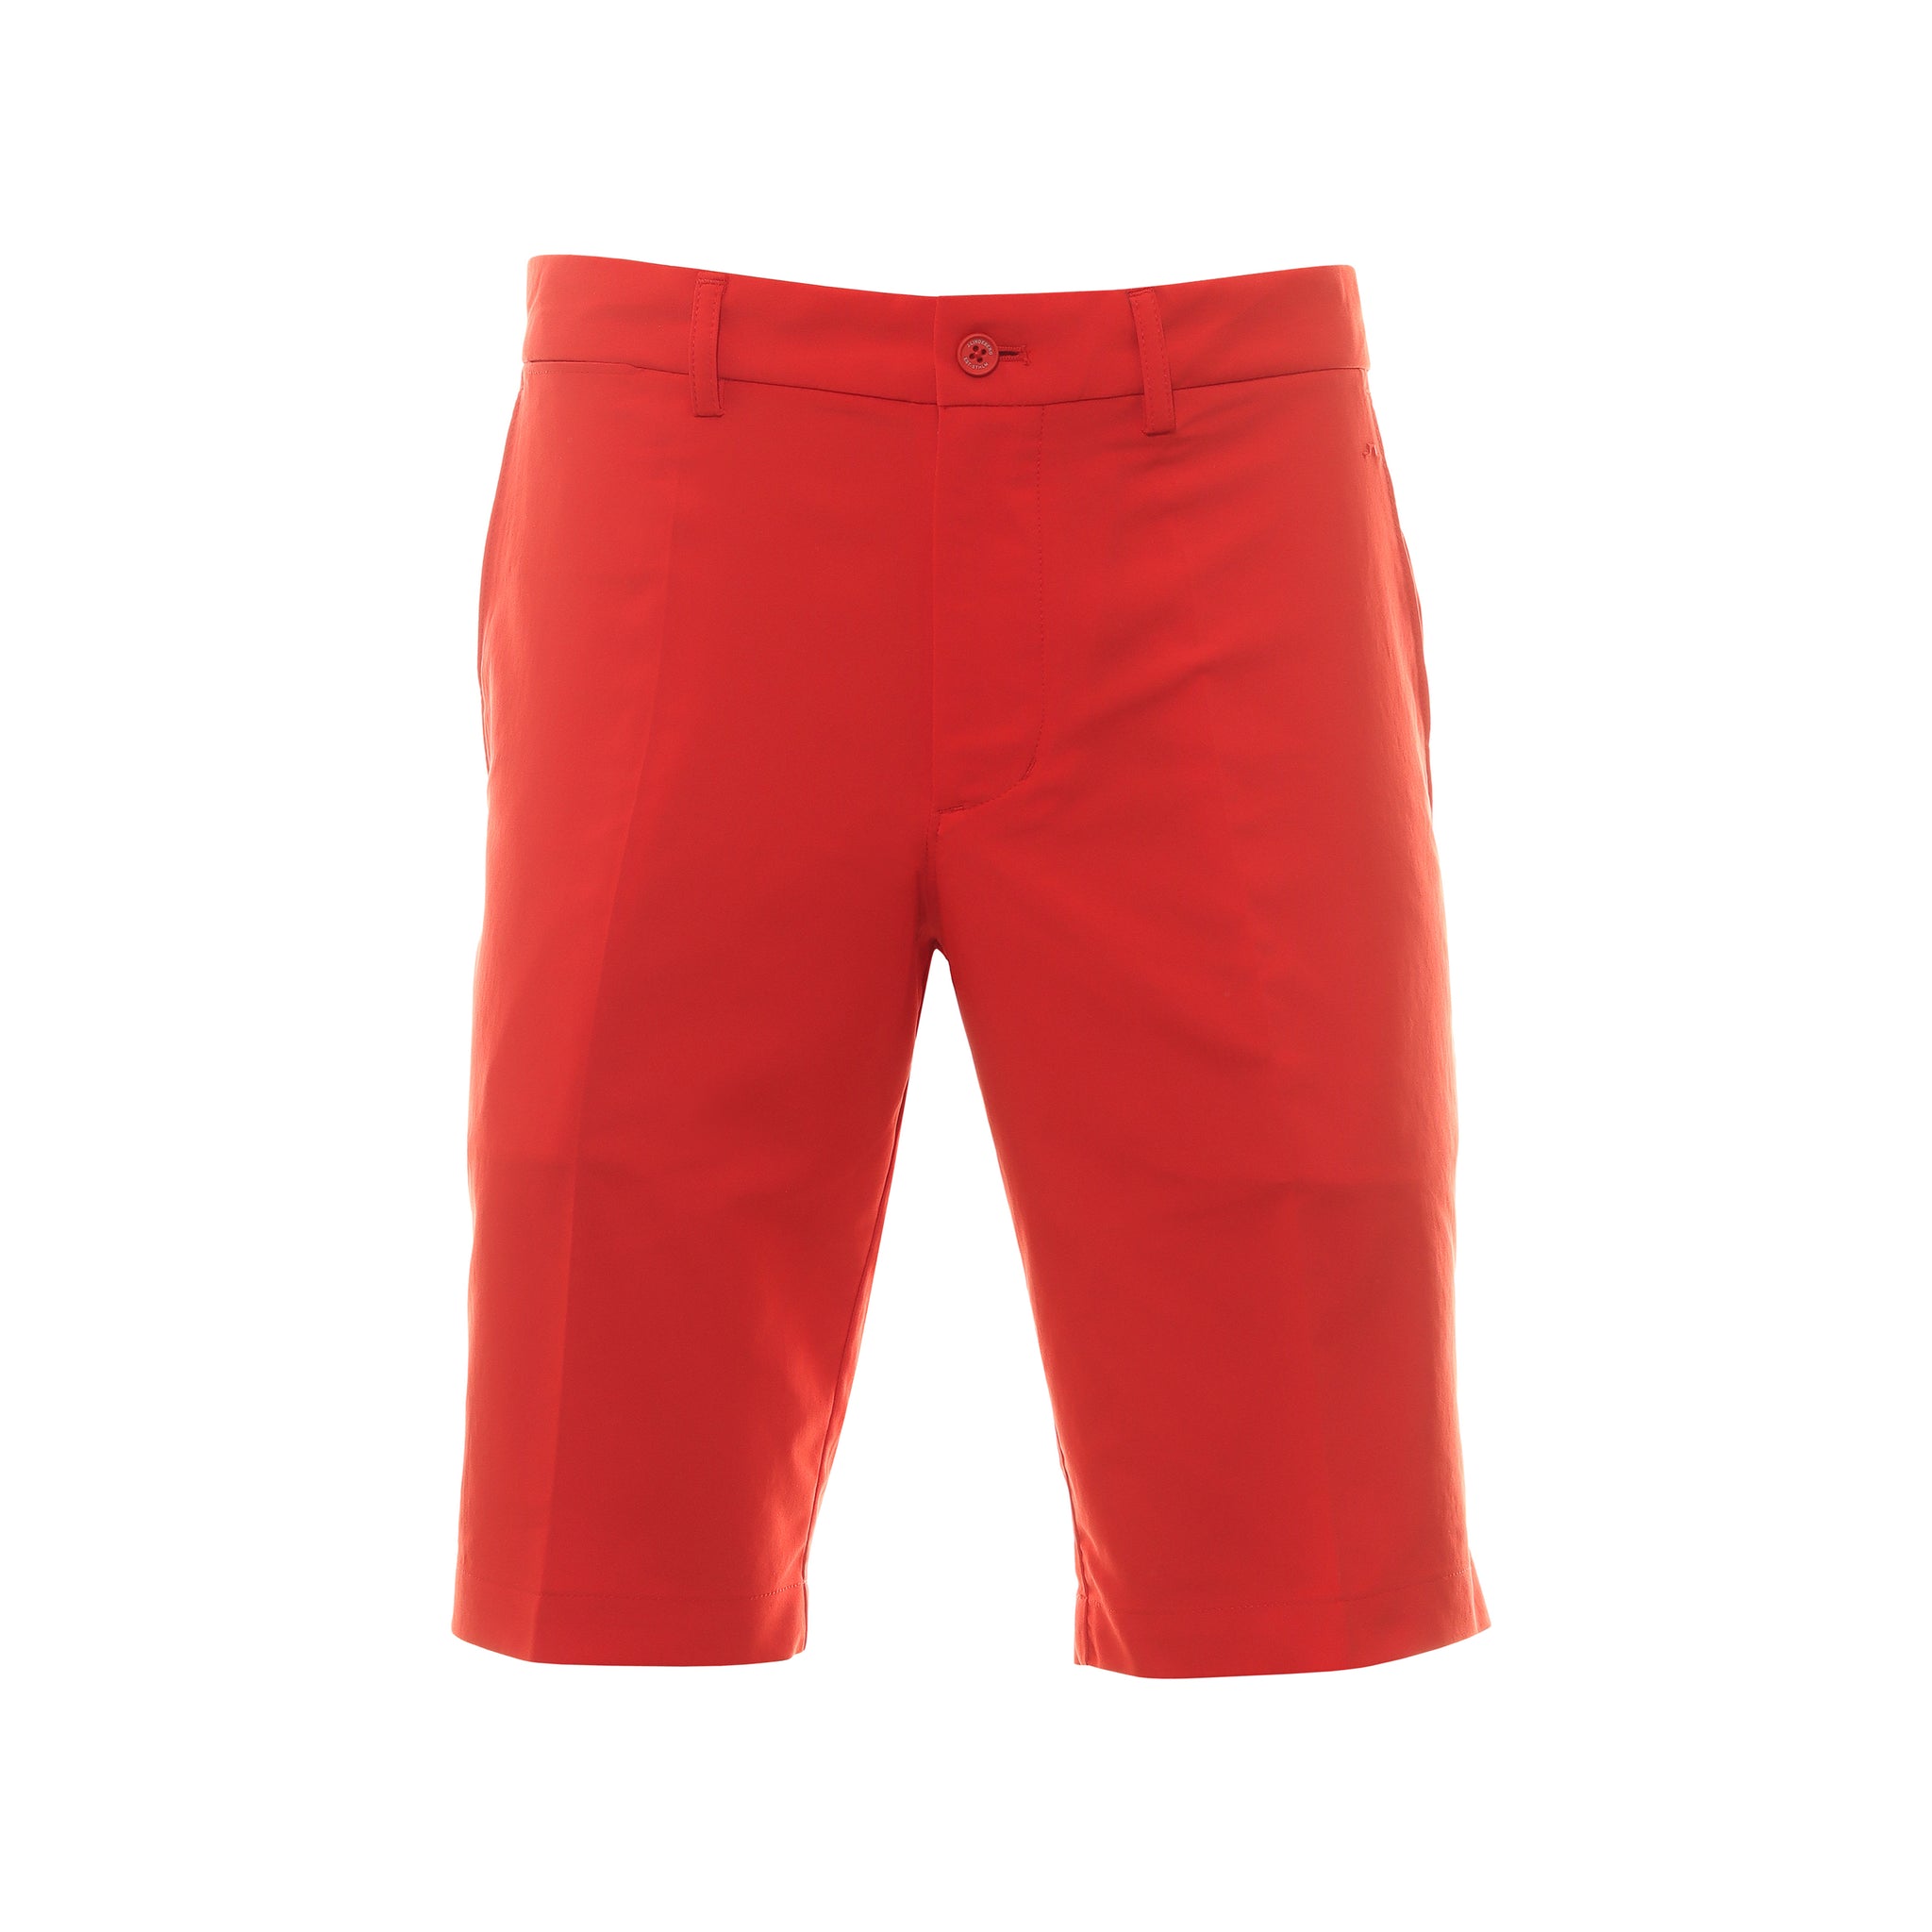 J.Lindeberg Golf Somle Short GMPA08616 Fiery Red G135 | Function18 ...